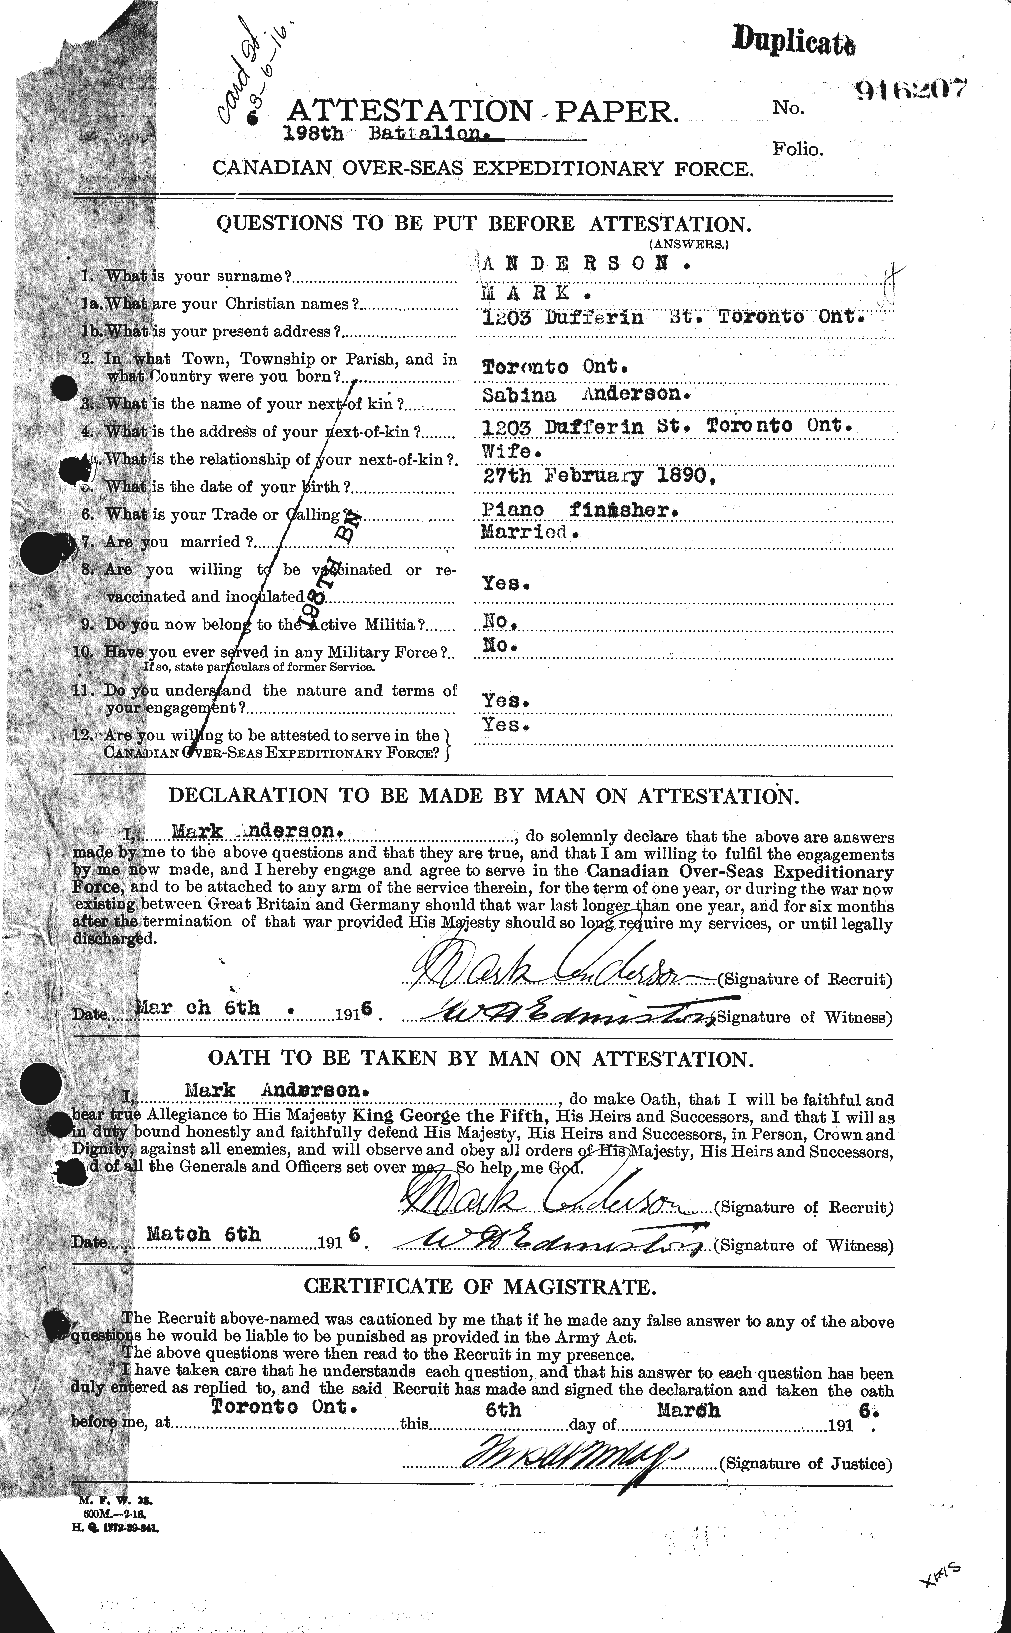 Personnel Records of the First World War - CEF 207481a